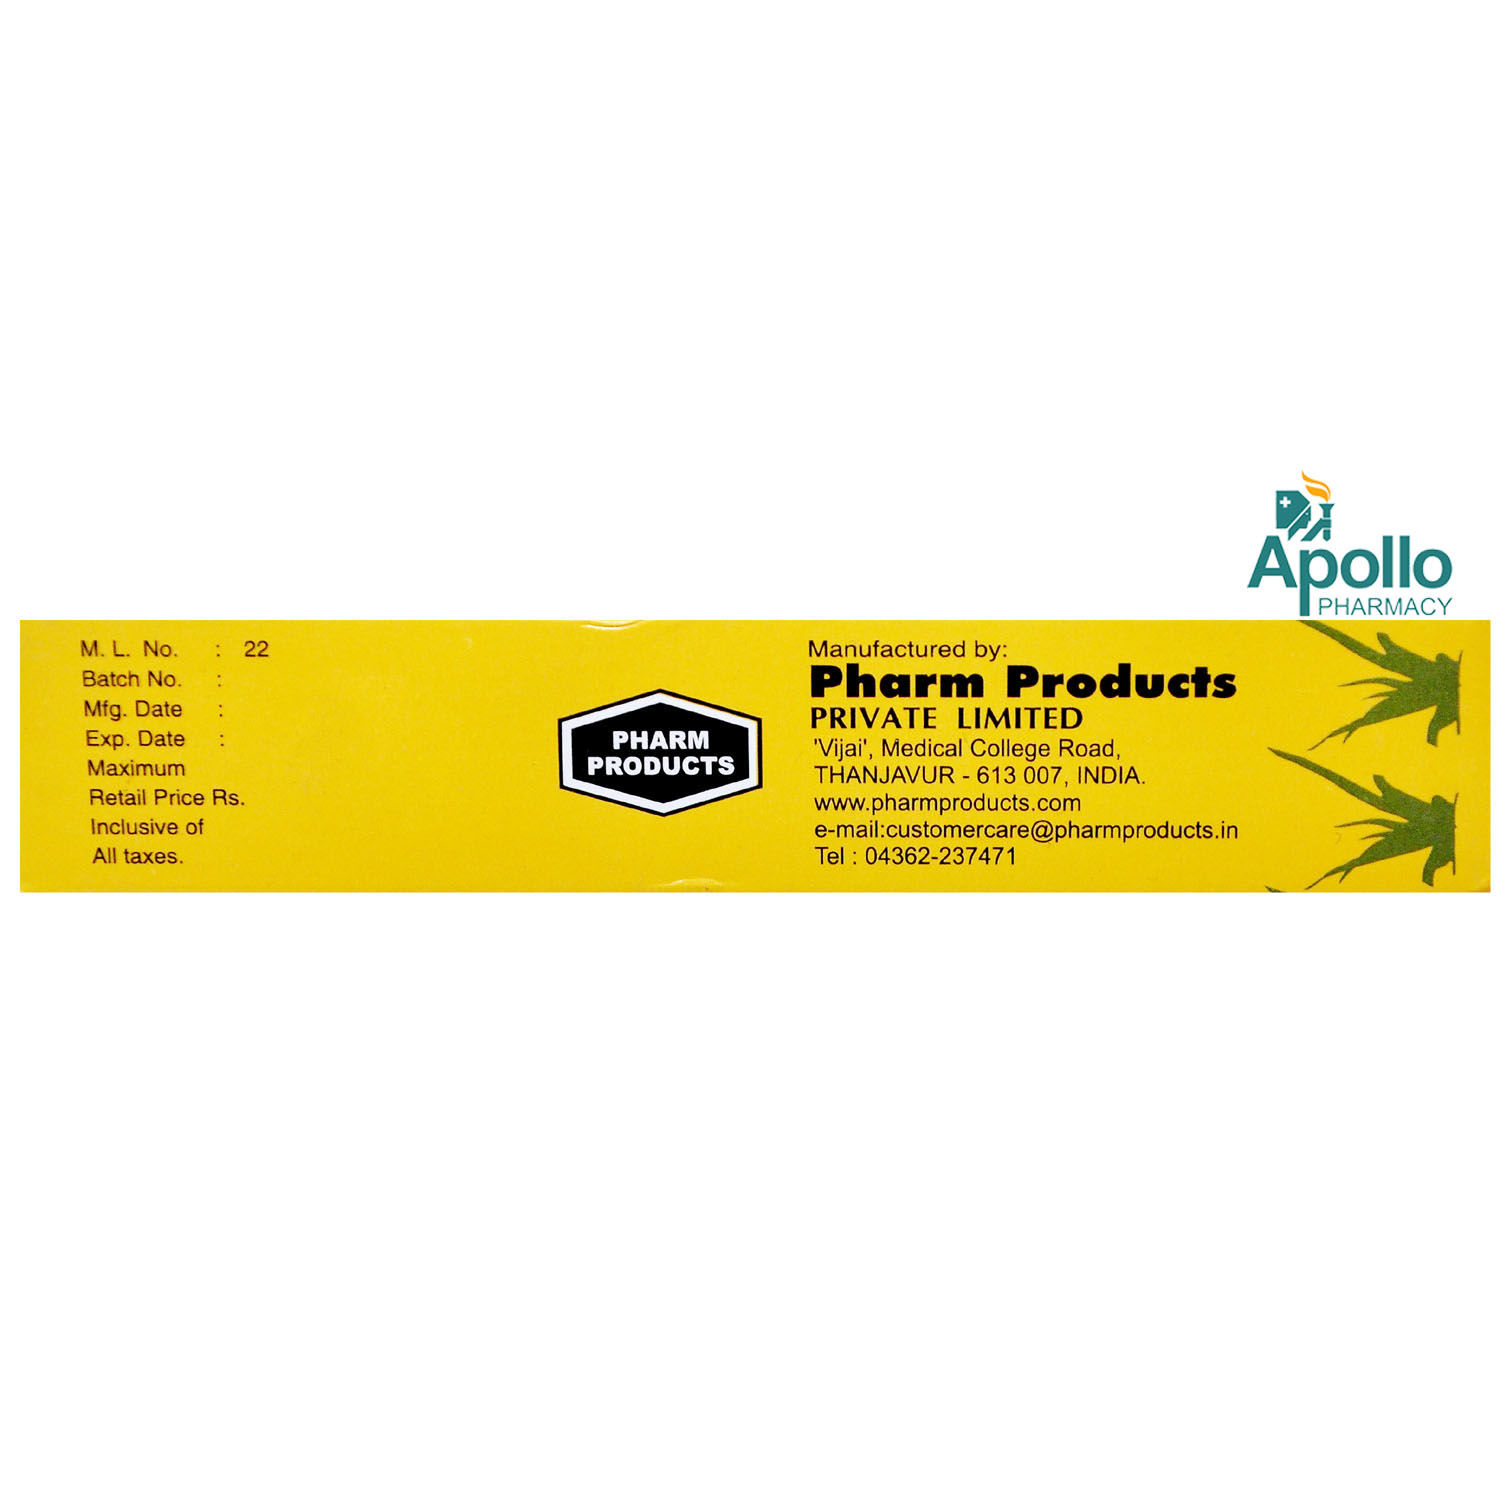 ALOINT GEL 30G, Pack of 1 Ointment